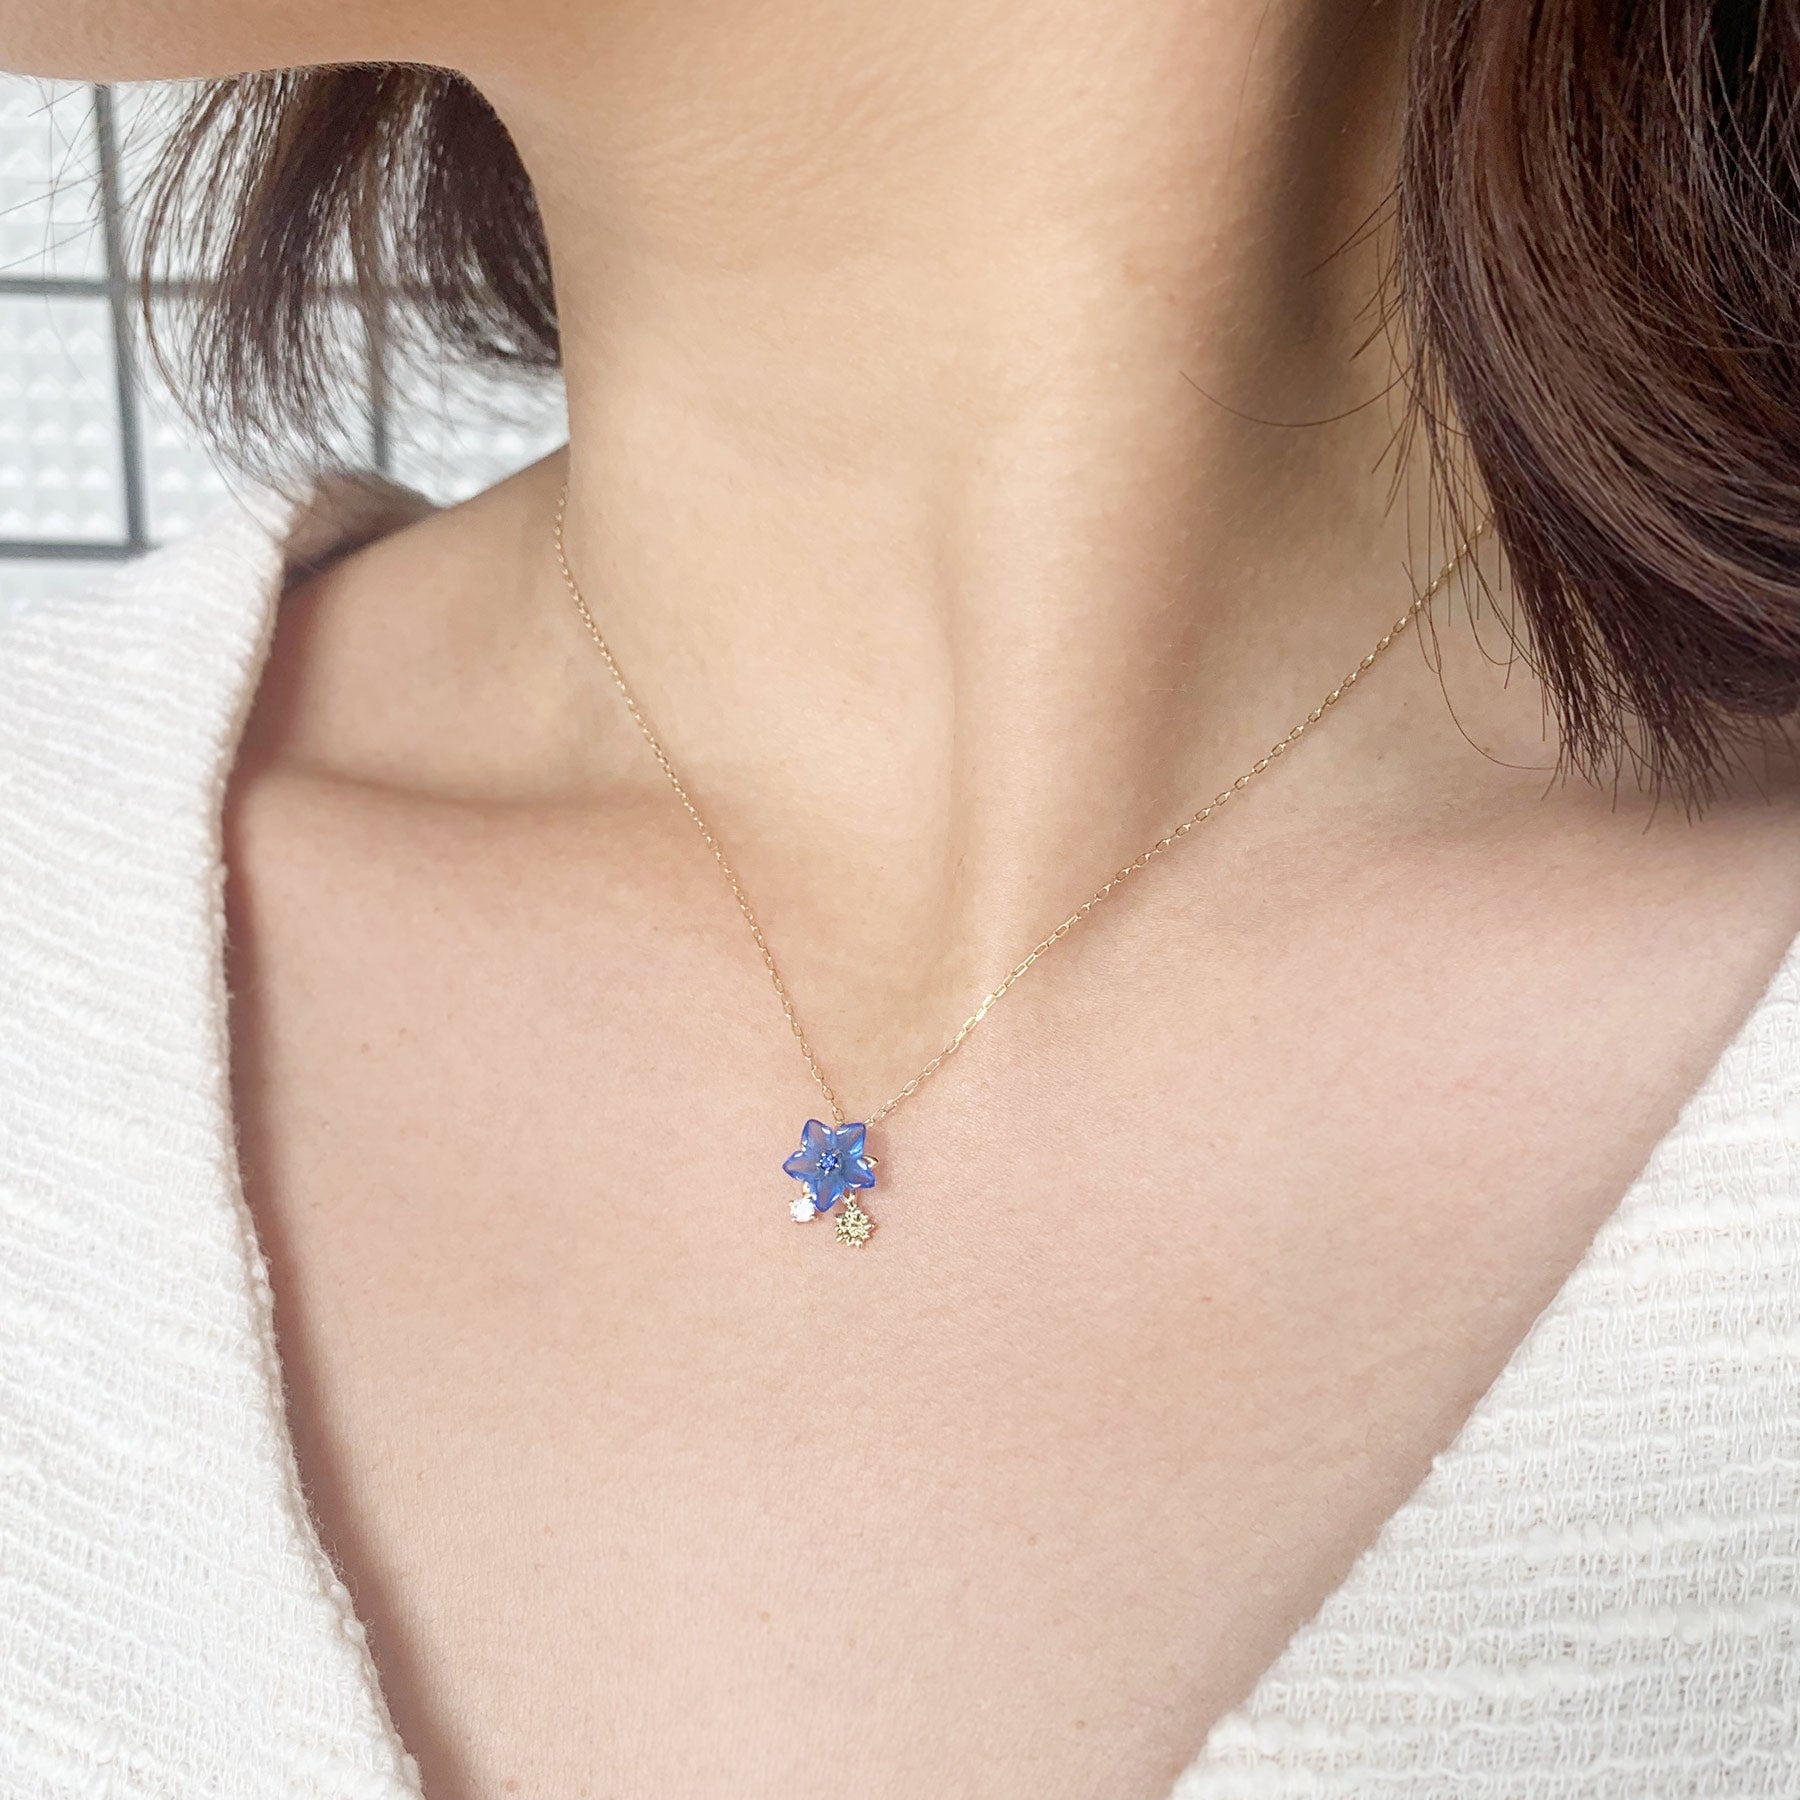 [Birth Flower Jewelry] September Gentian Necklace - Model Image